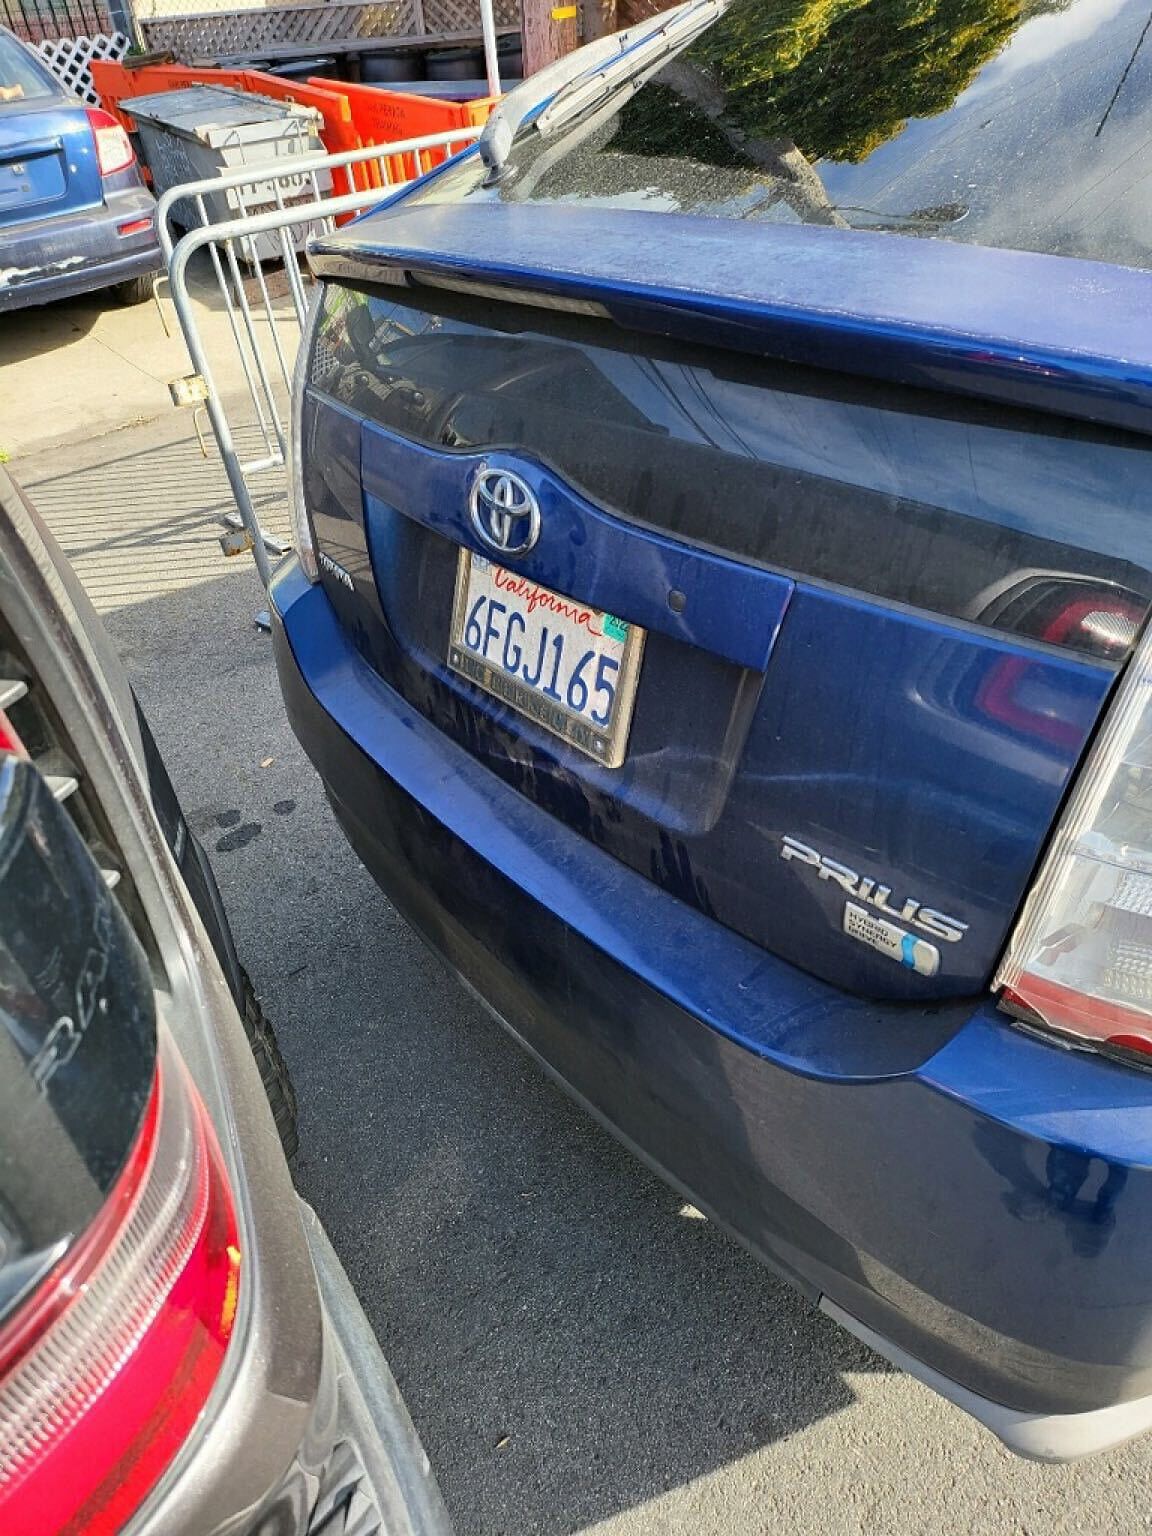 Photo of car in the street with license plate 6FGJ165 in California